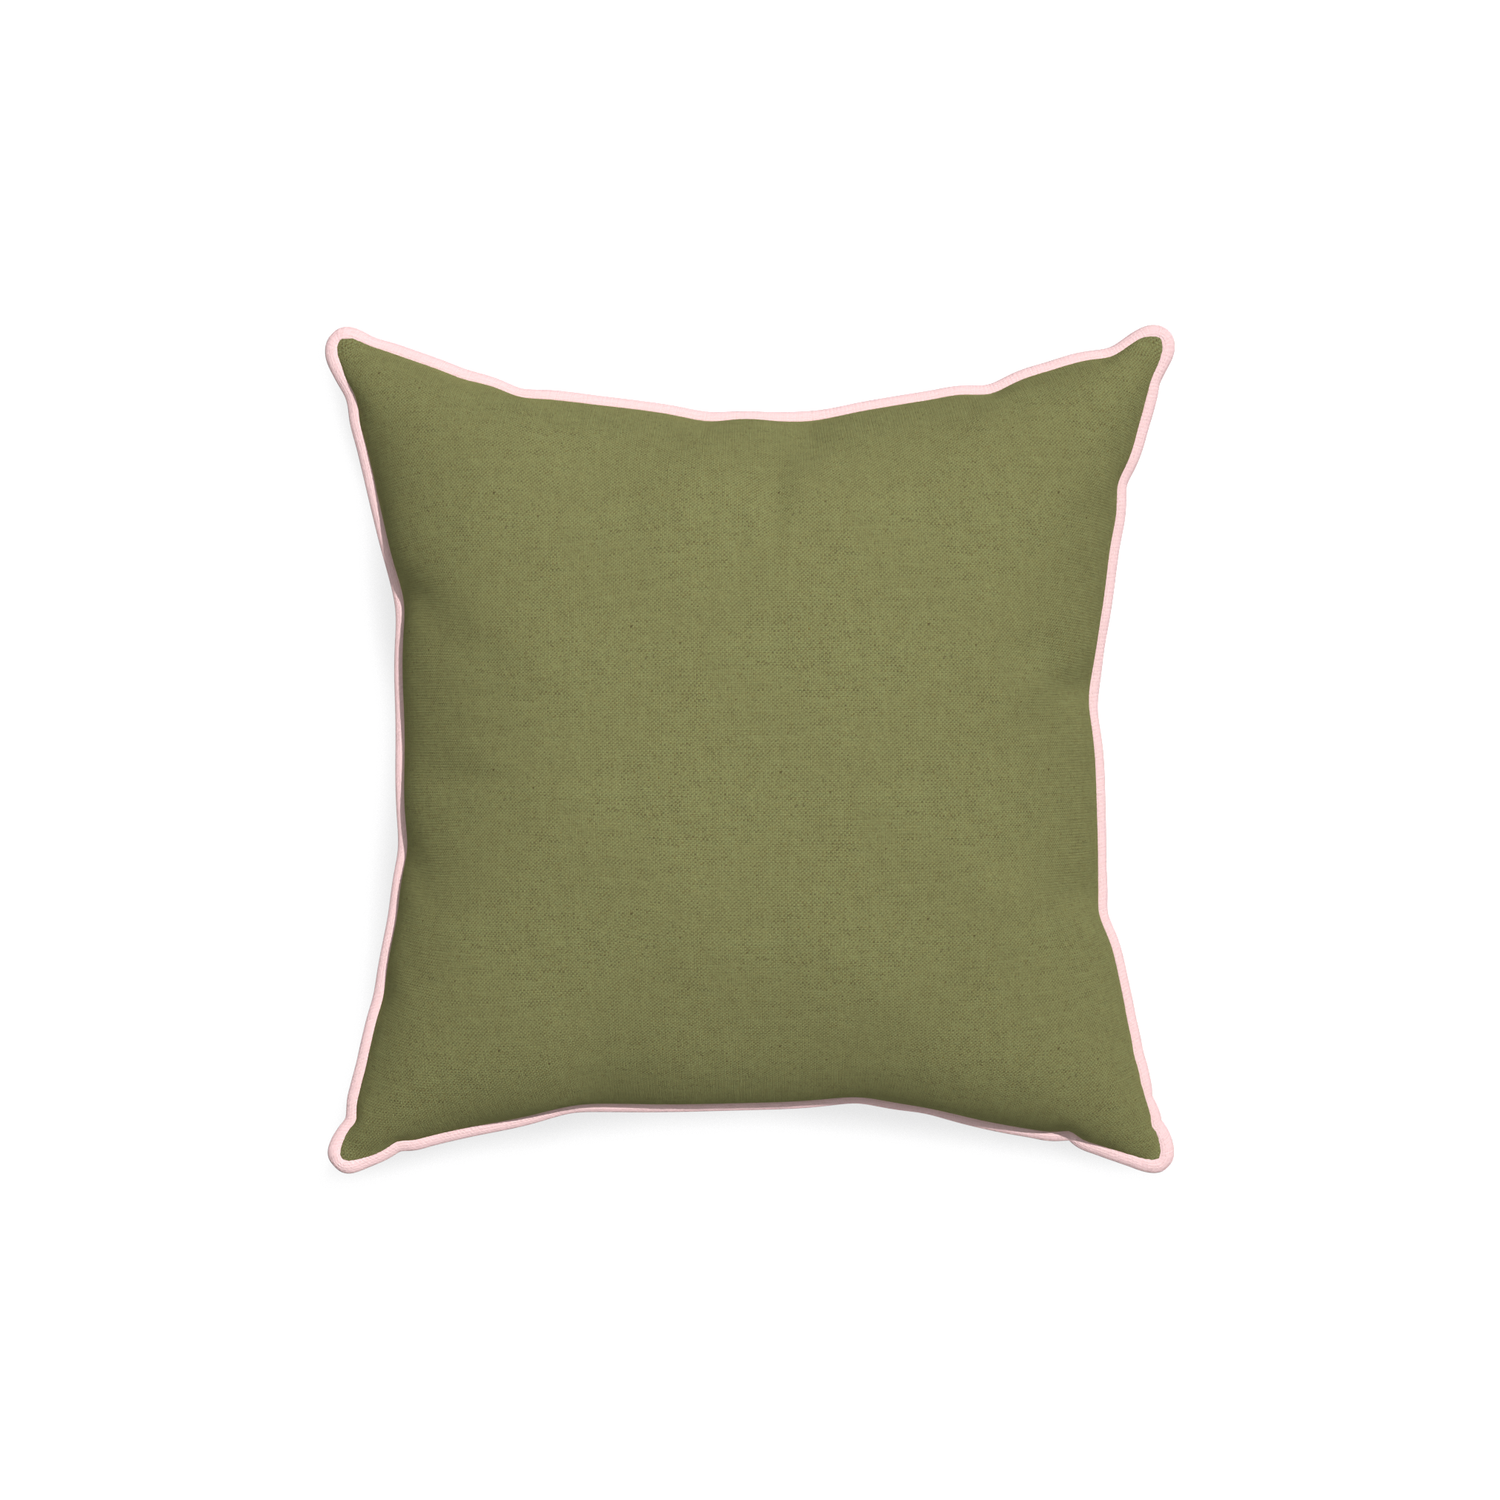 18-square moss custom moss greenpillow with petal piping on white background